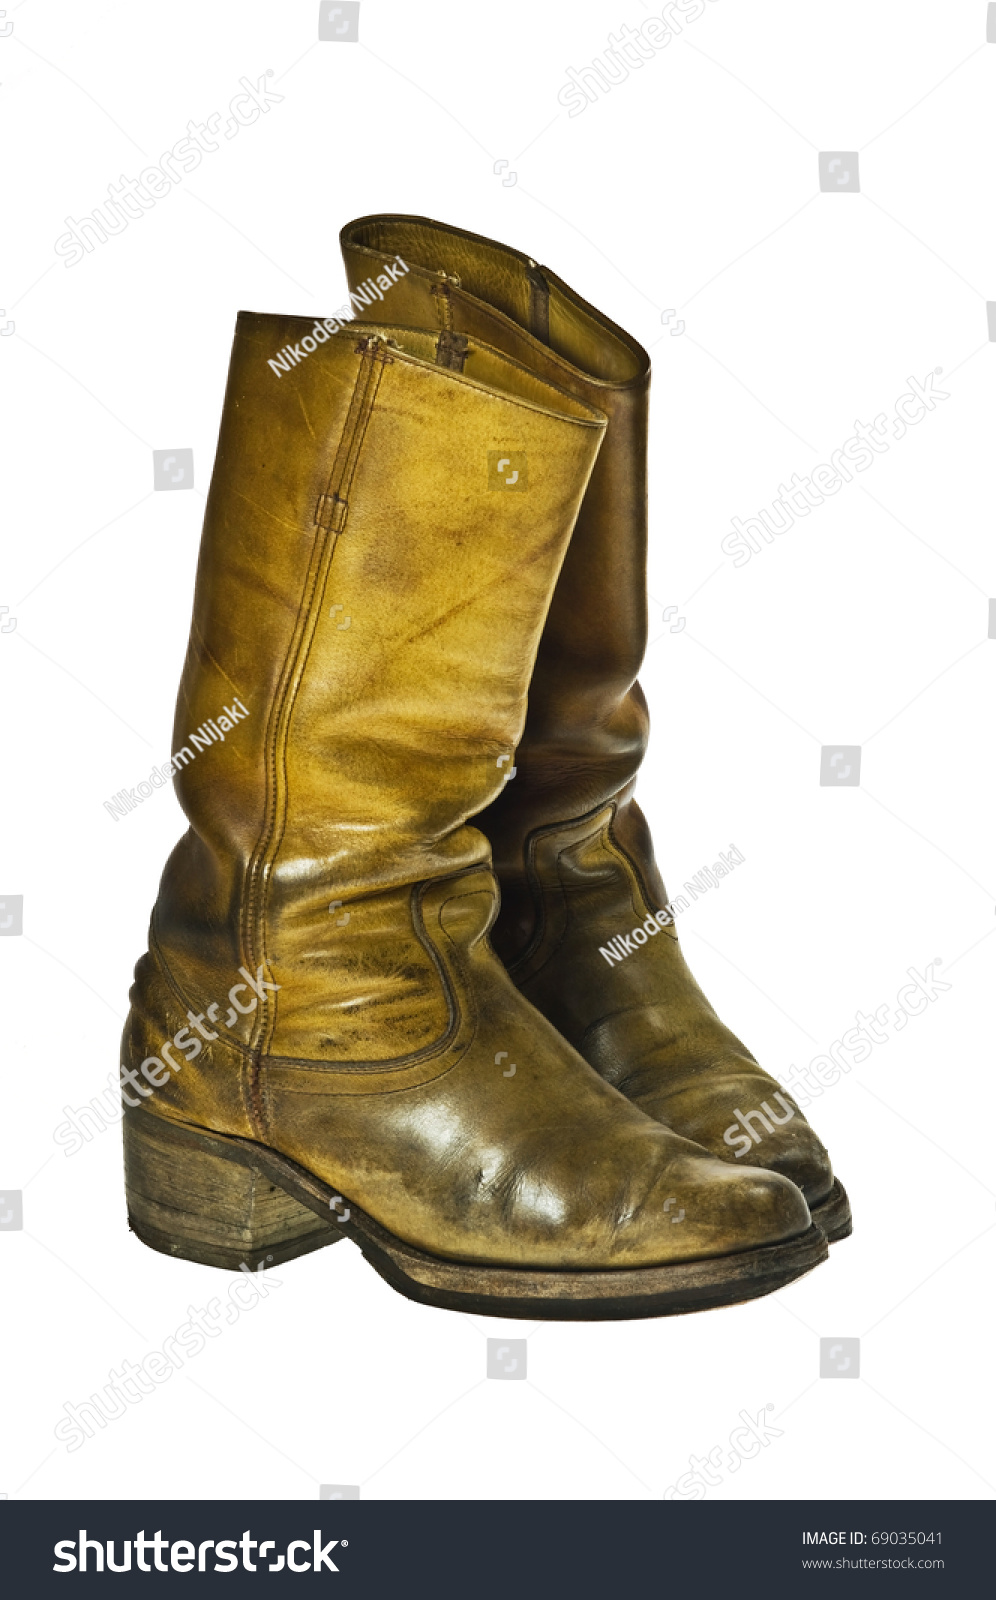 Old Worn Cowboy Style Boots From The Seventies Of The Twentieth Century ...